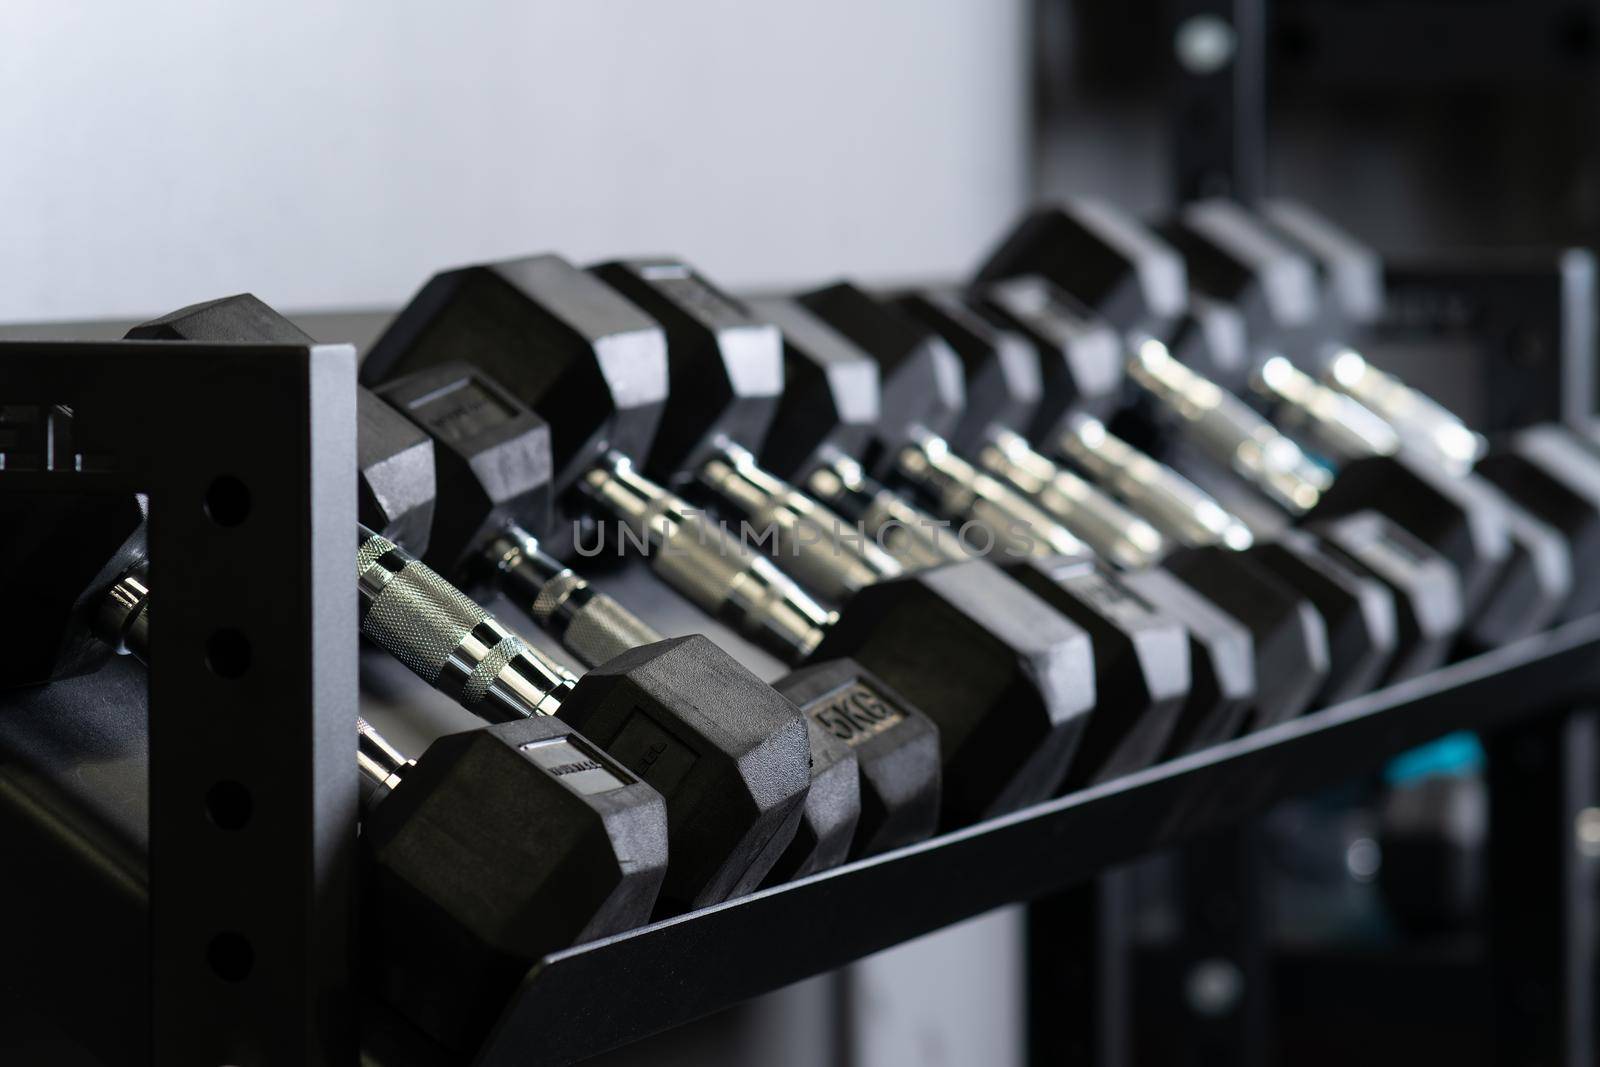 Dumbbell home gym wall blurry set storage strength equipment, concept studio rag from heavy for exercise hand, weight bodybuilding. ,